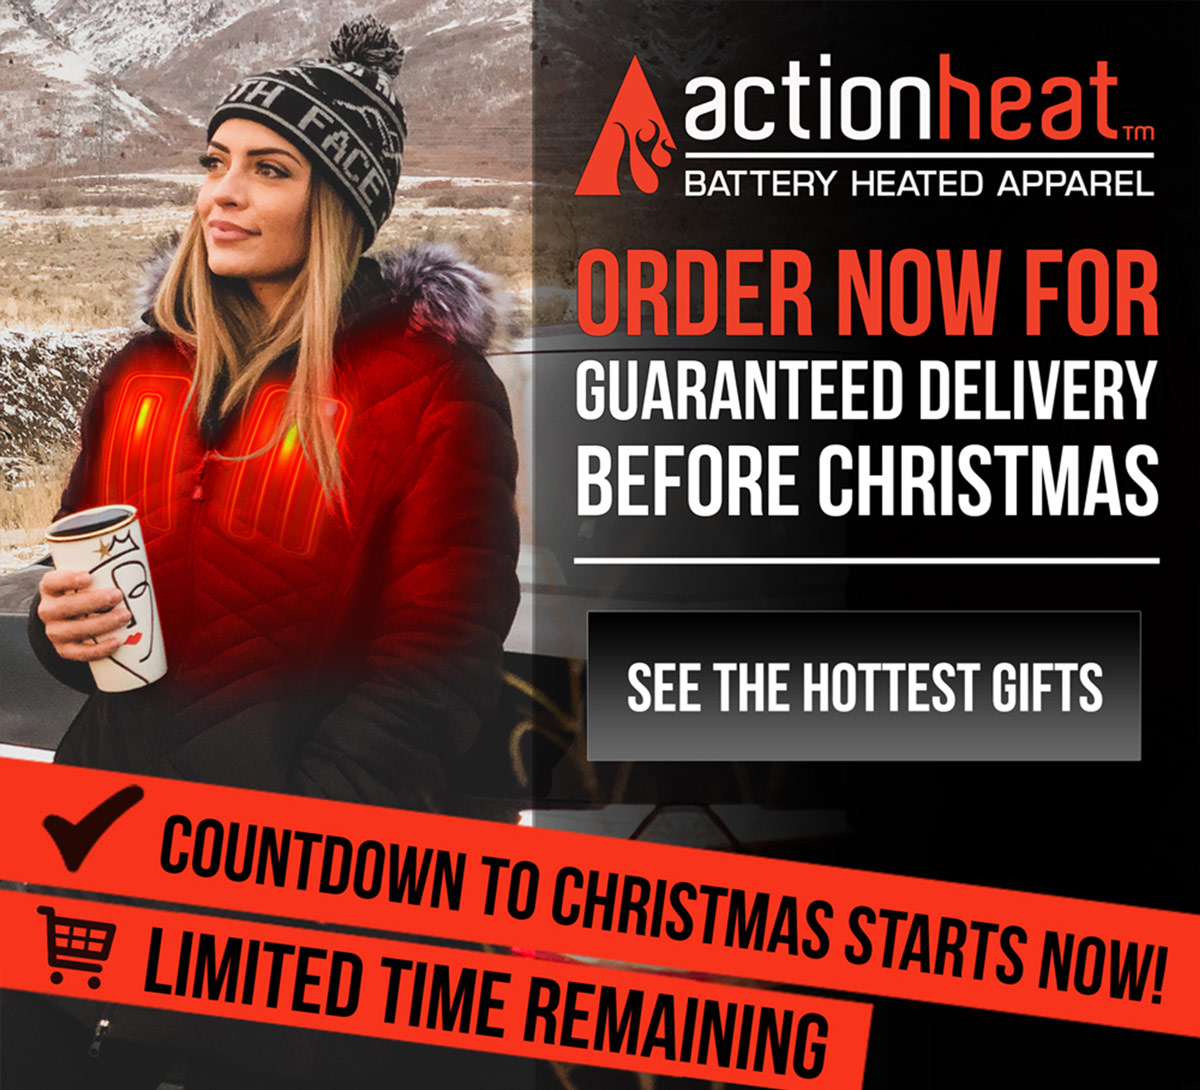 Order Now For Delivery Before Christmas! Shop ActionHeat's Hottest Gifts!